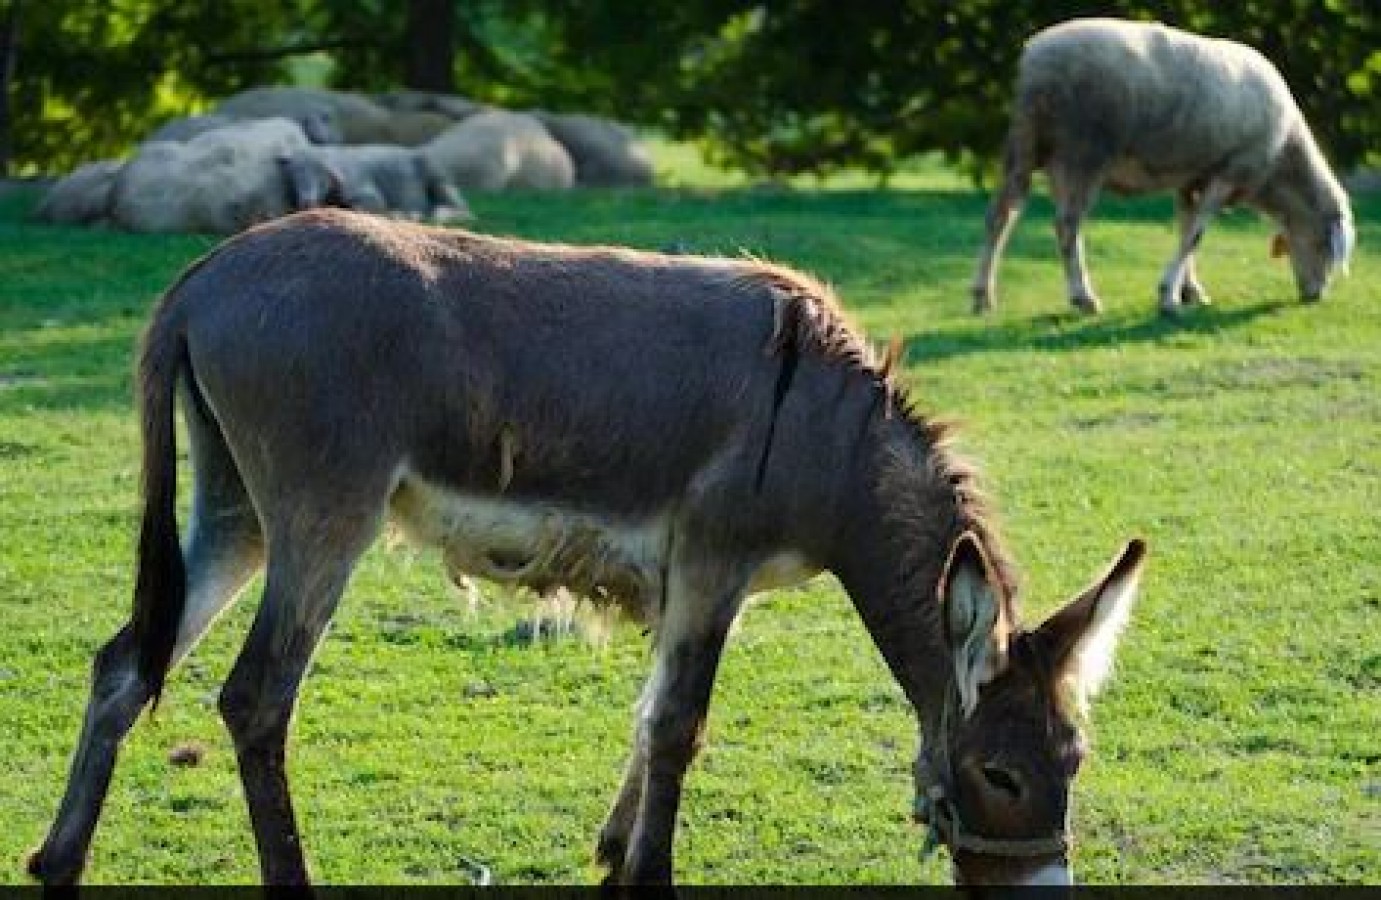 The young man left the IT job and started to raise the donkey, knowing the  income, your senses will be blown away | NewsTrack English 1